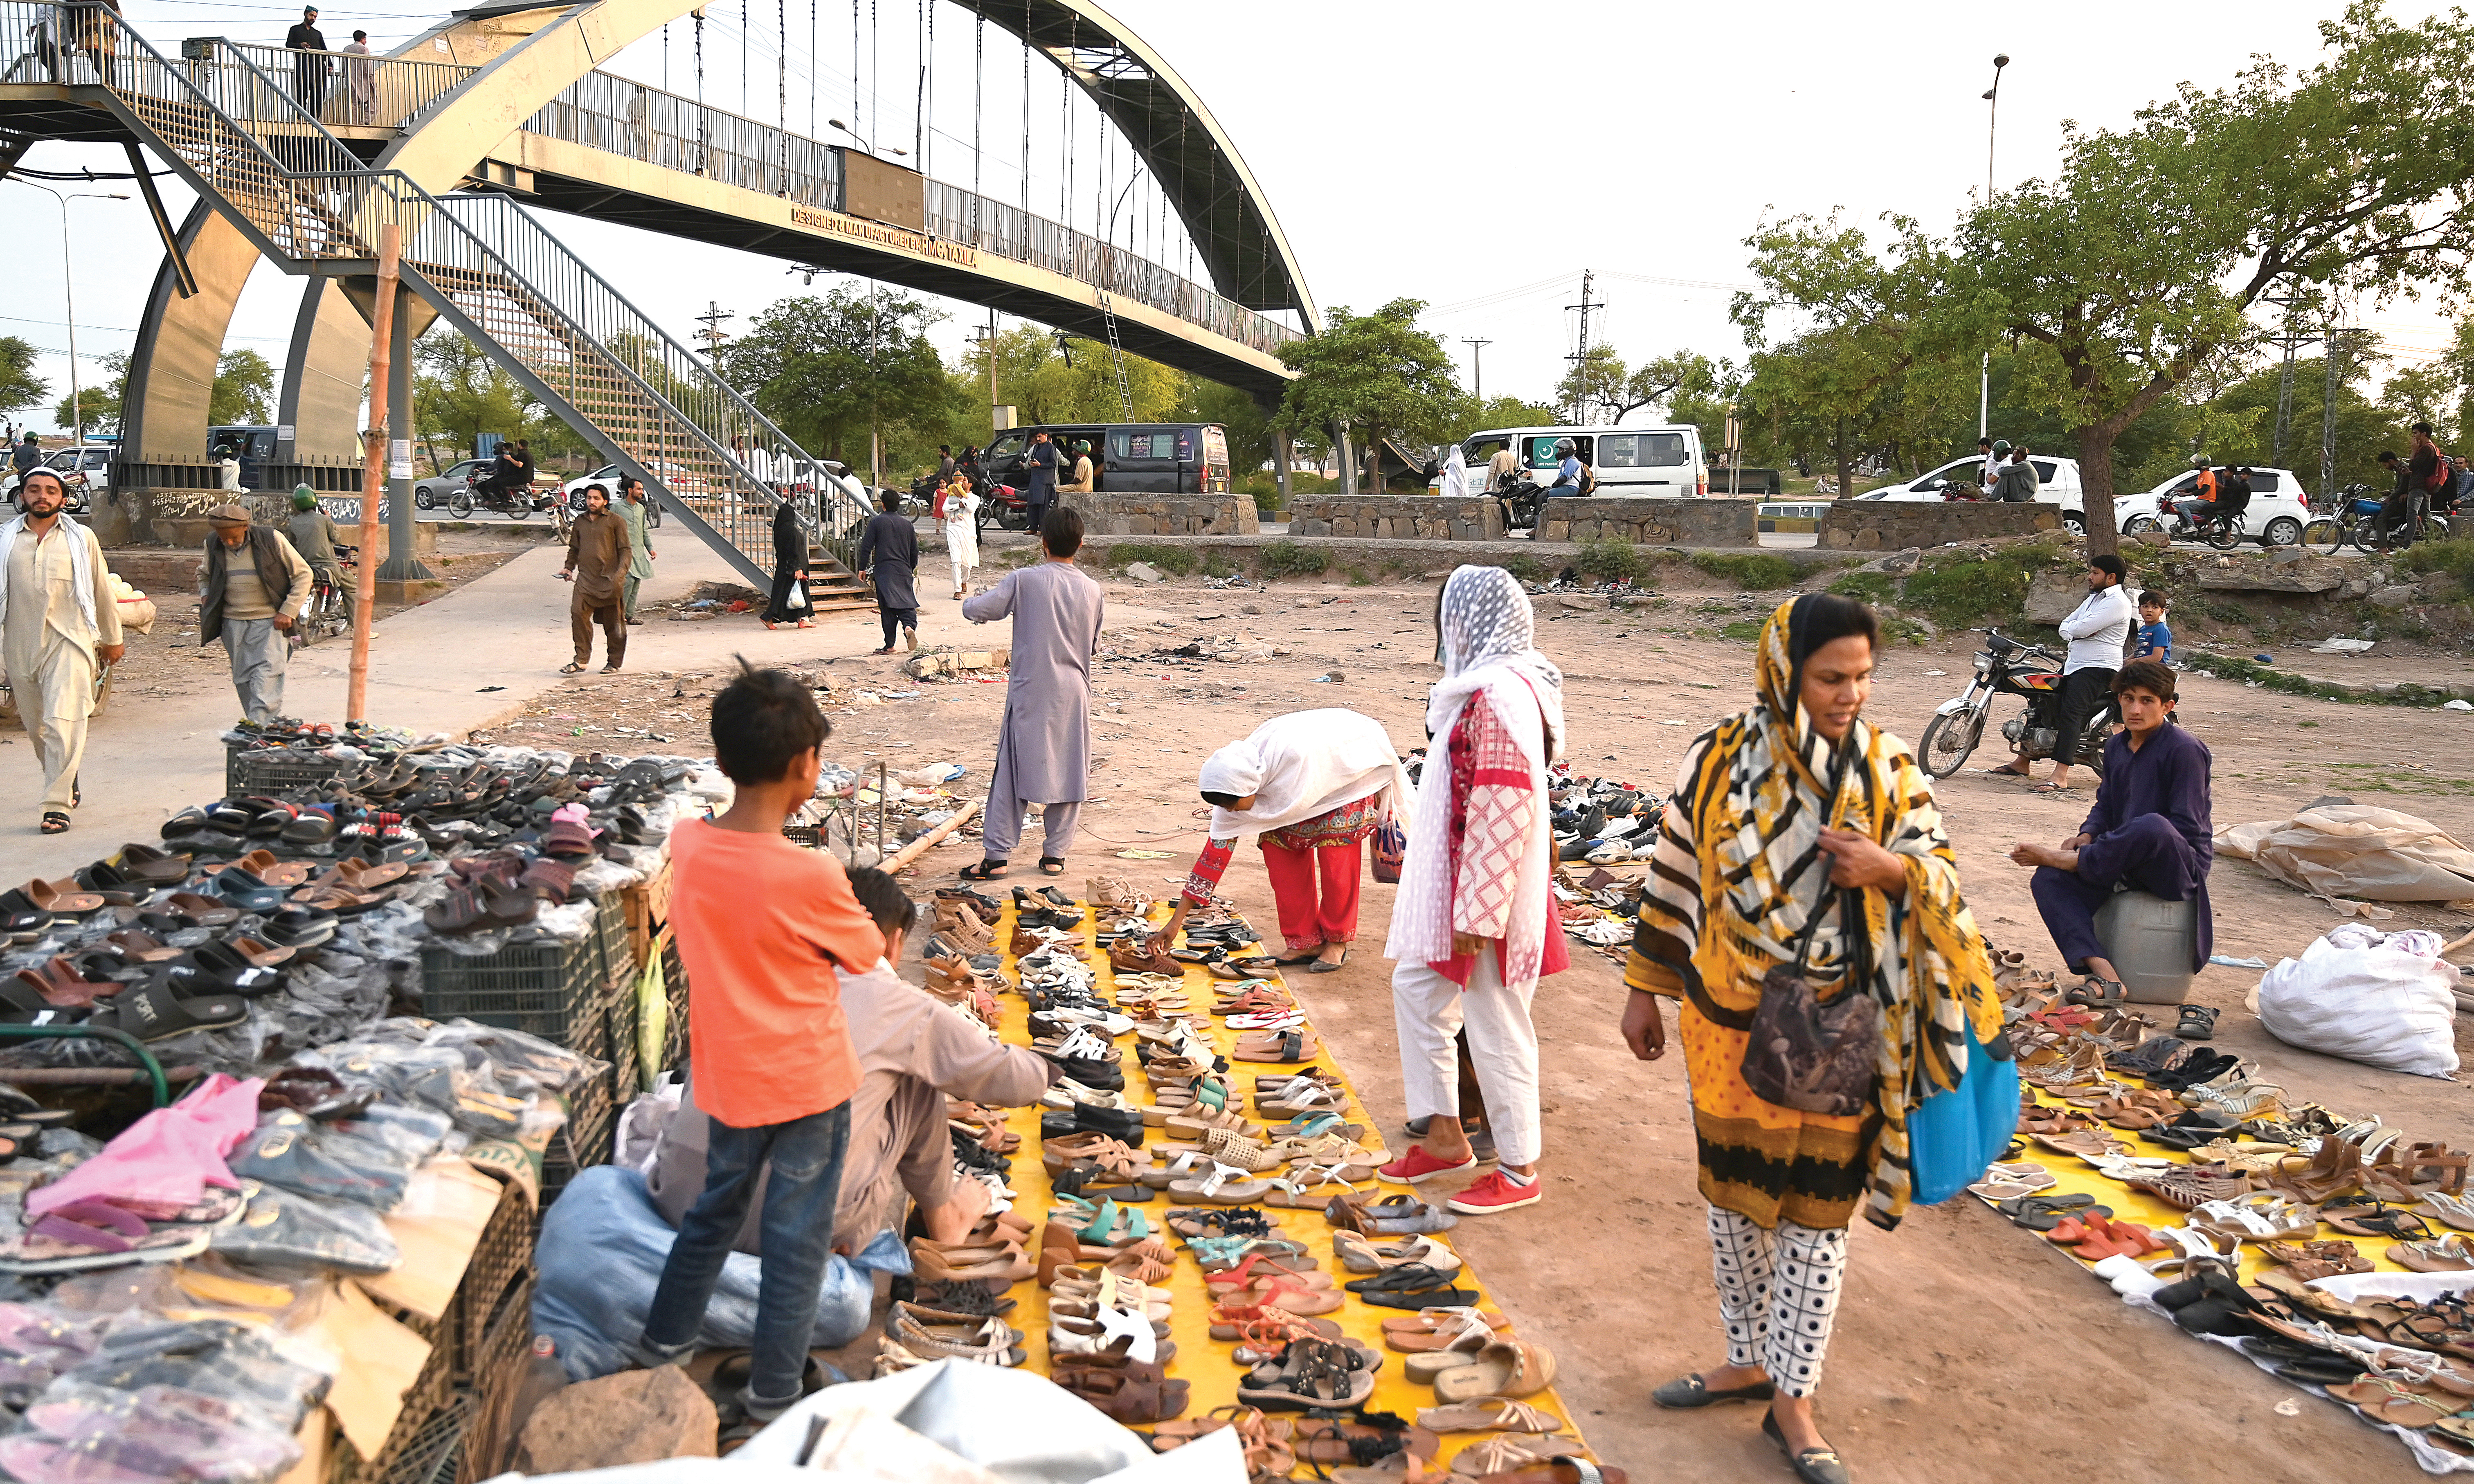 ISLAMABAD: People browse through second hand footwear for sale at a roadside bazaar in Islamabad on May 2, 2023.- AFP